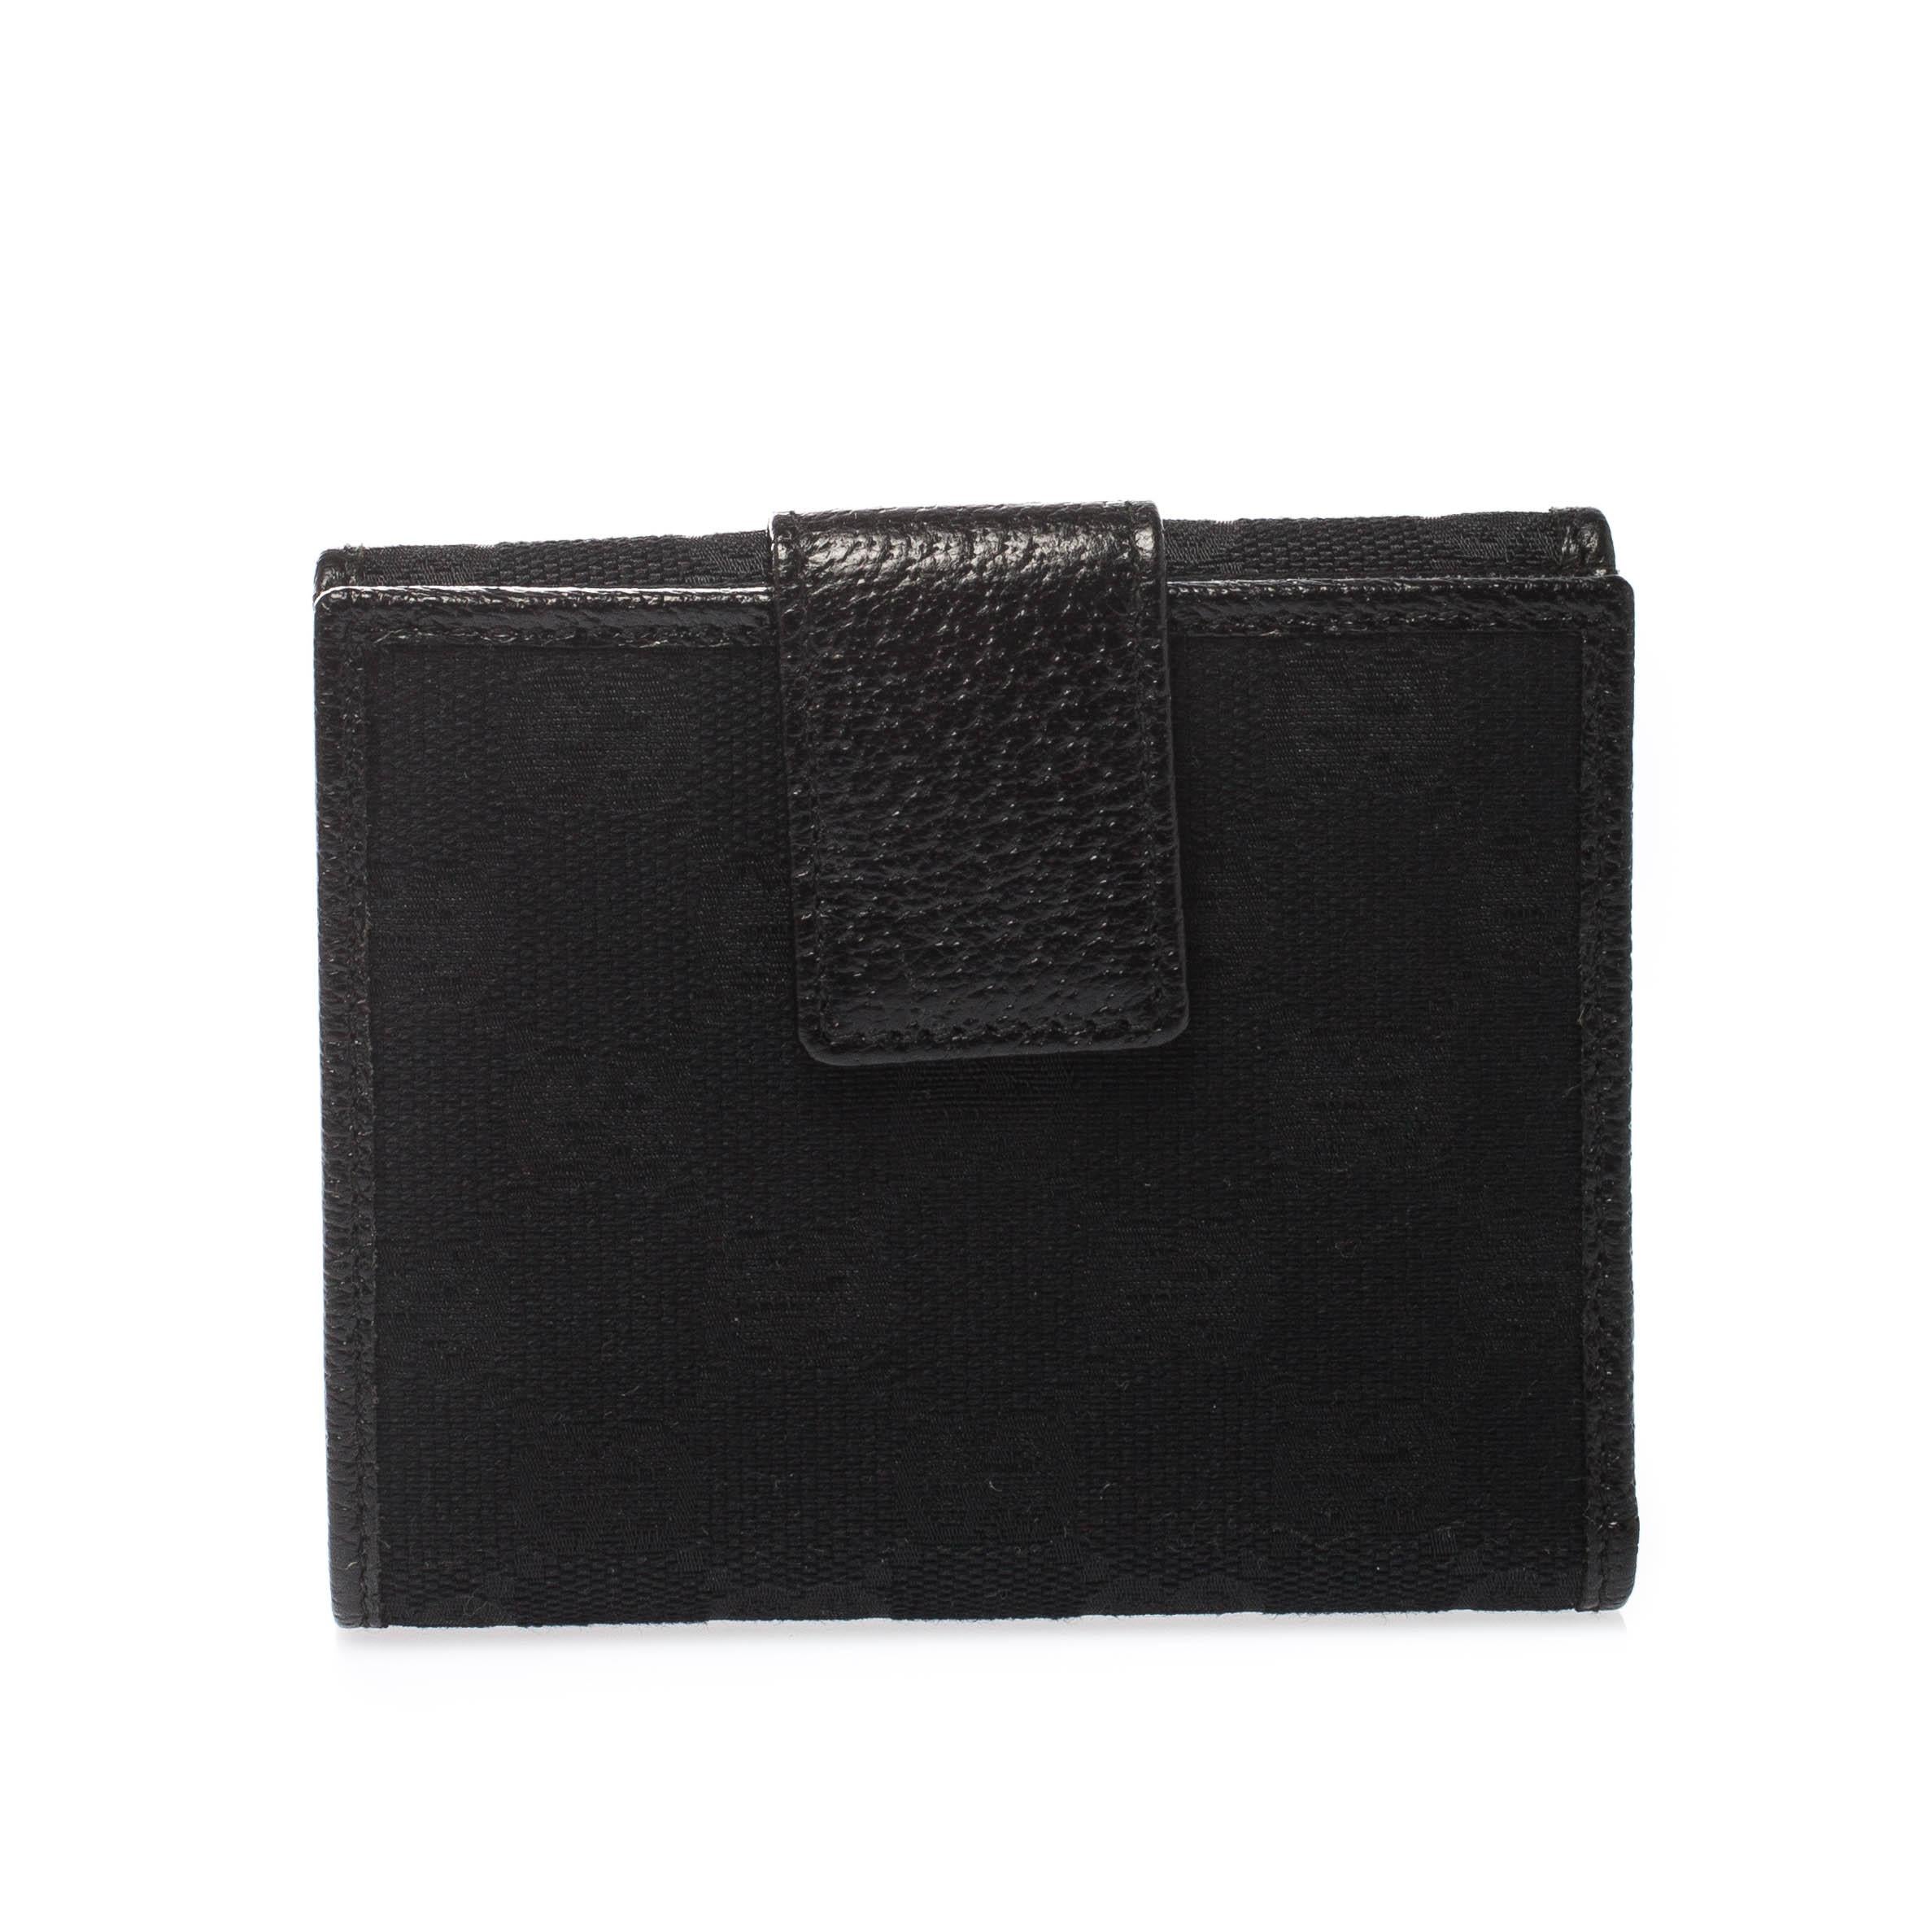 Now here's a wallet that is both stylish and functional. This French wallet by Gucci has been crafted from Guccissima leather and detailed with a name plaque in silver-tone on the front flap closure. It opens to reveal multiple slots and slip